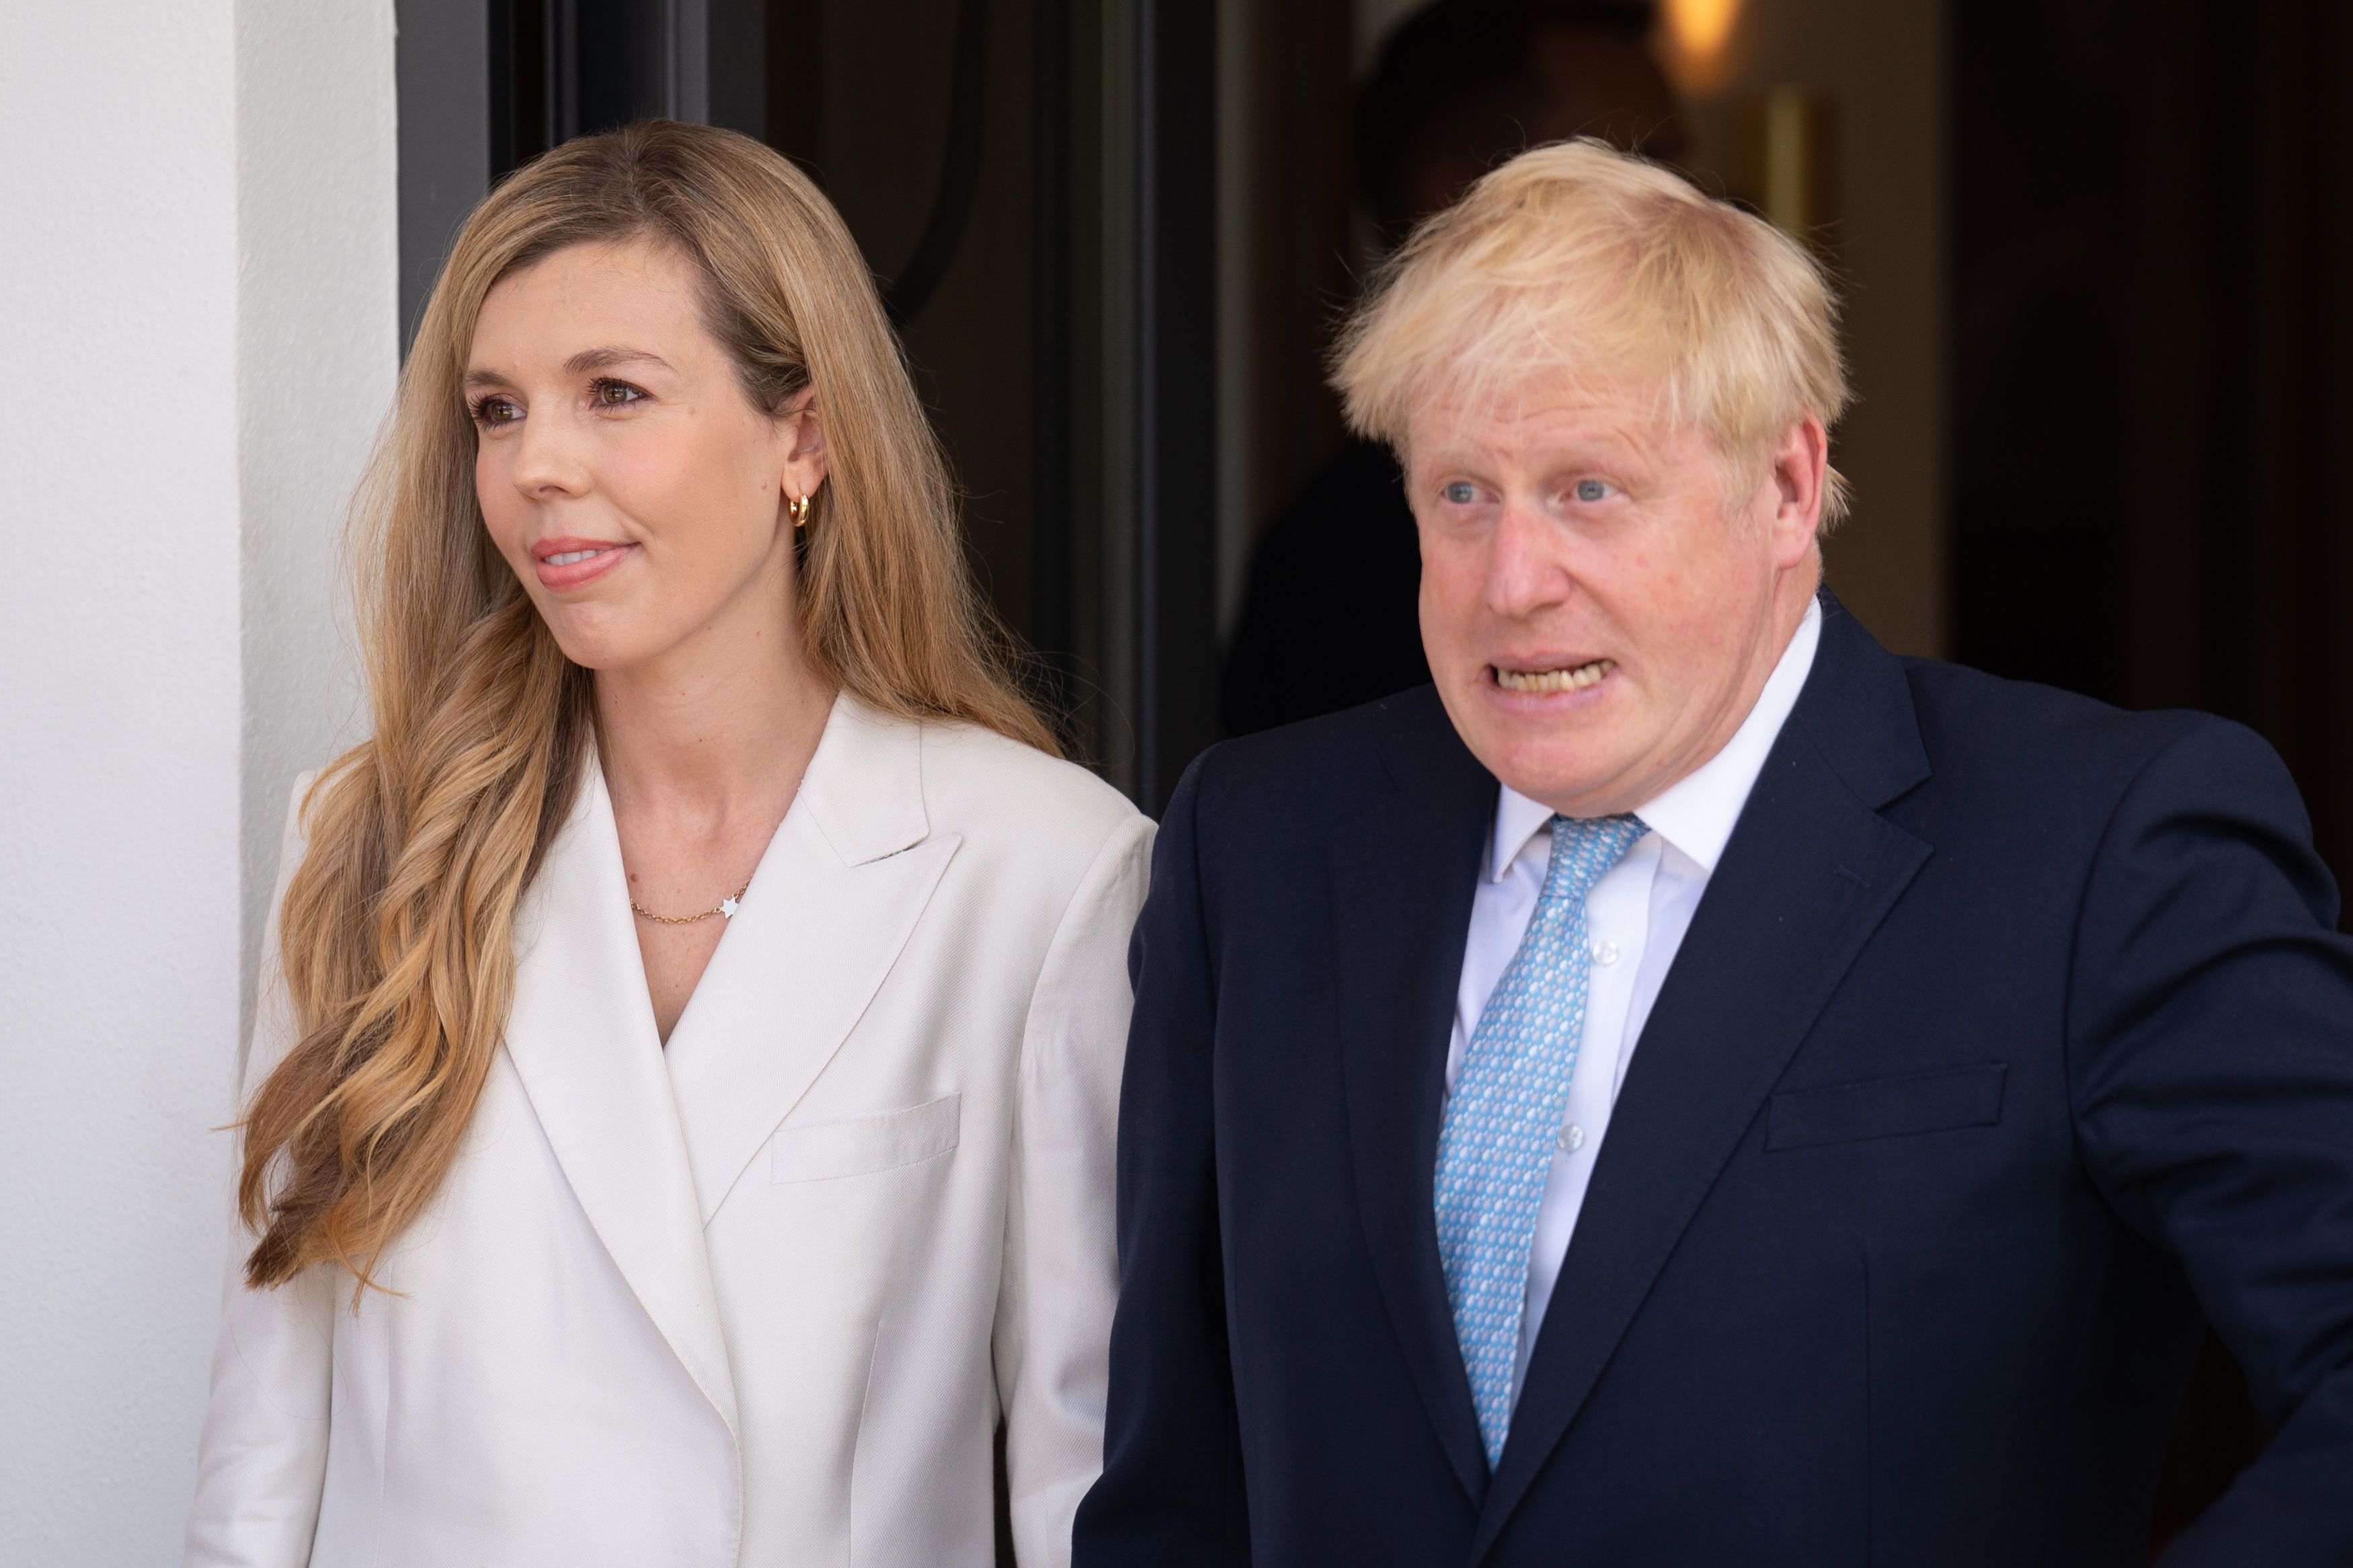 Boris Johnson and Carrie Symonds a relationship timeline image pic